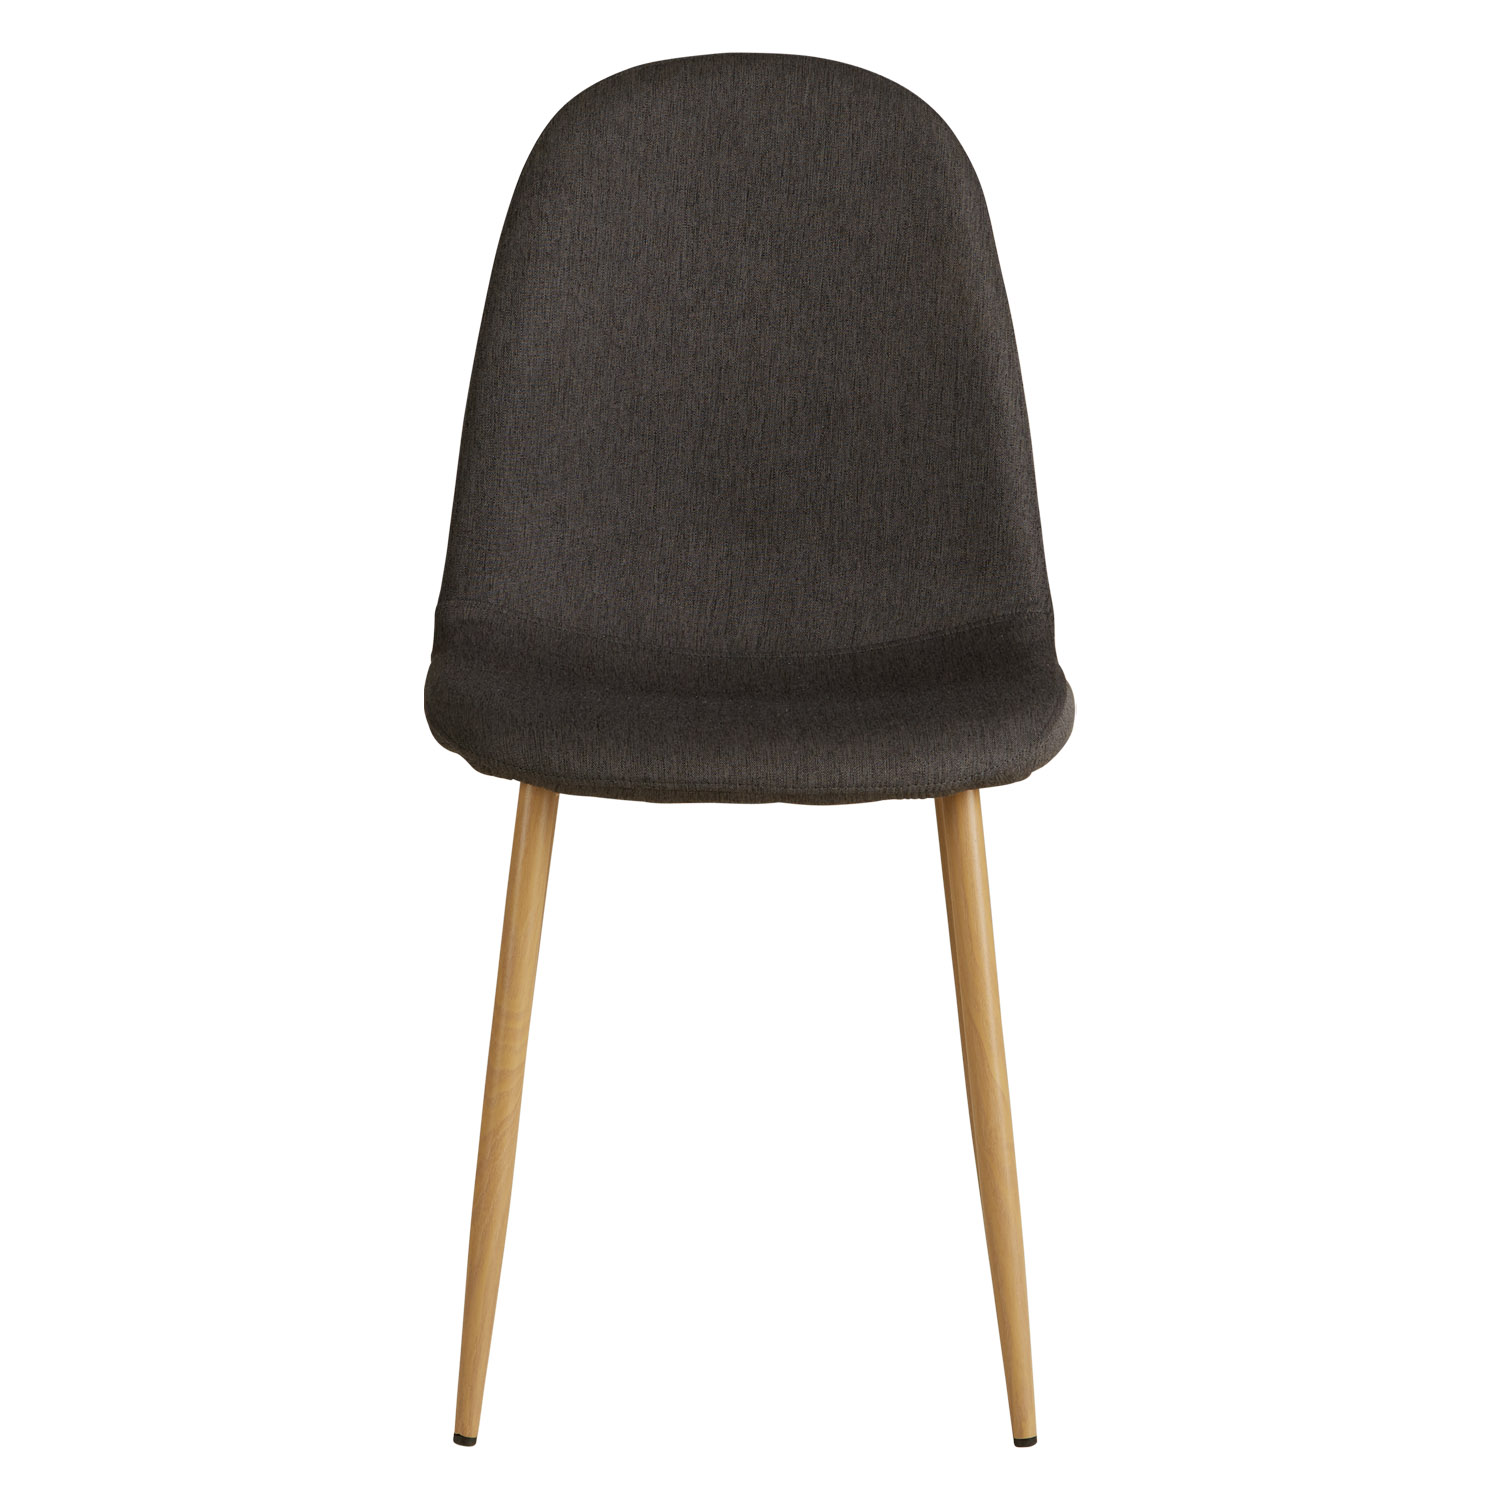 Dining Chair Egg Chair Anthracite Armchair Dining Room Chair Upholstered Chair Eames Chair Kitchen Chair